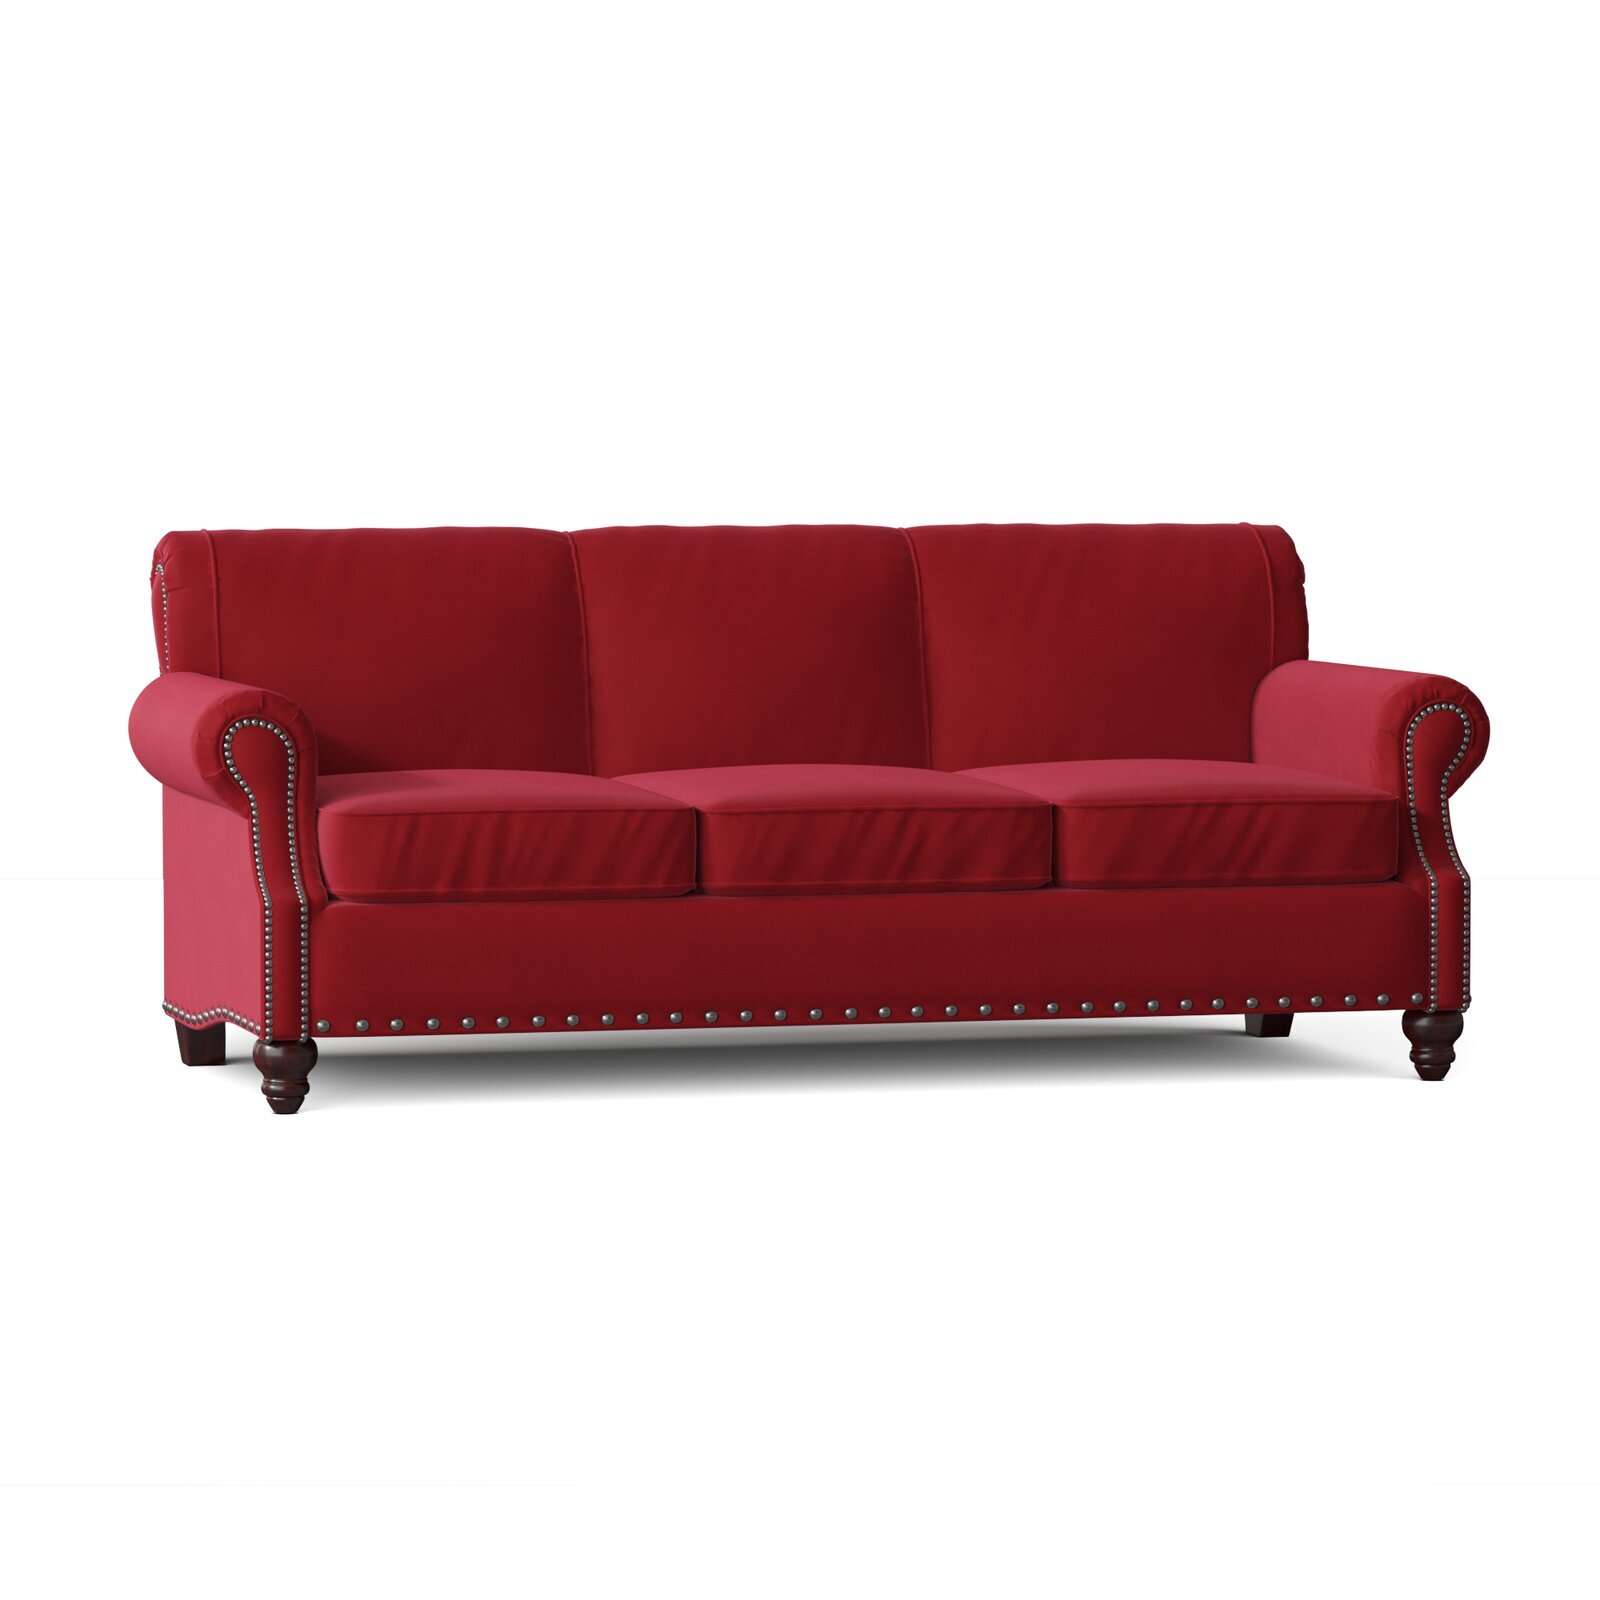 Classic Red Fabric Couch